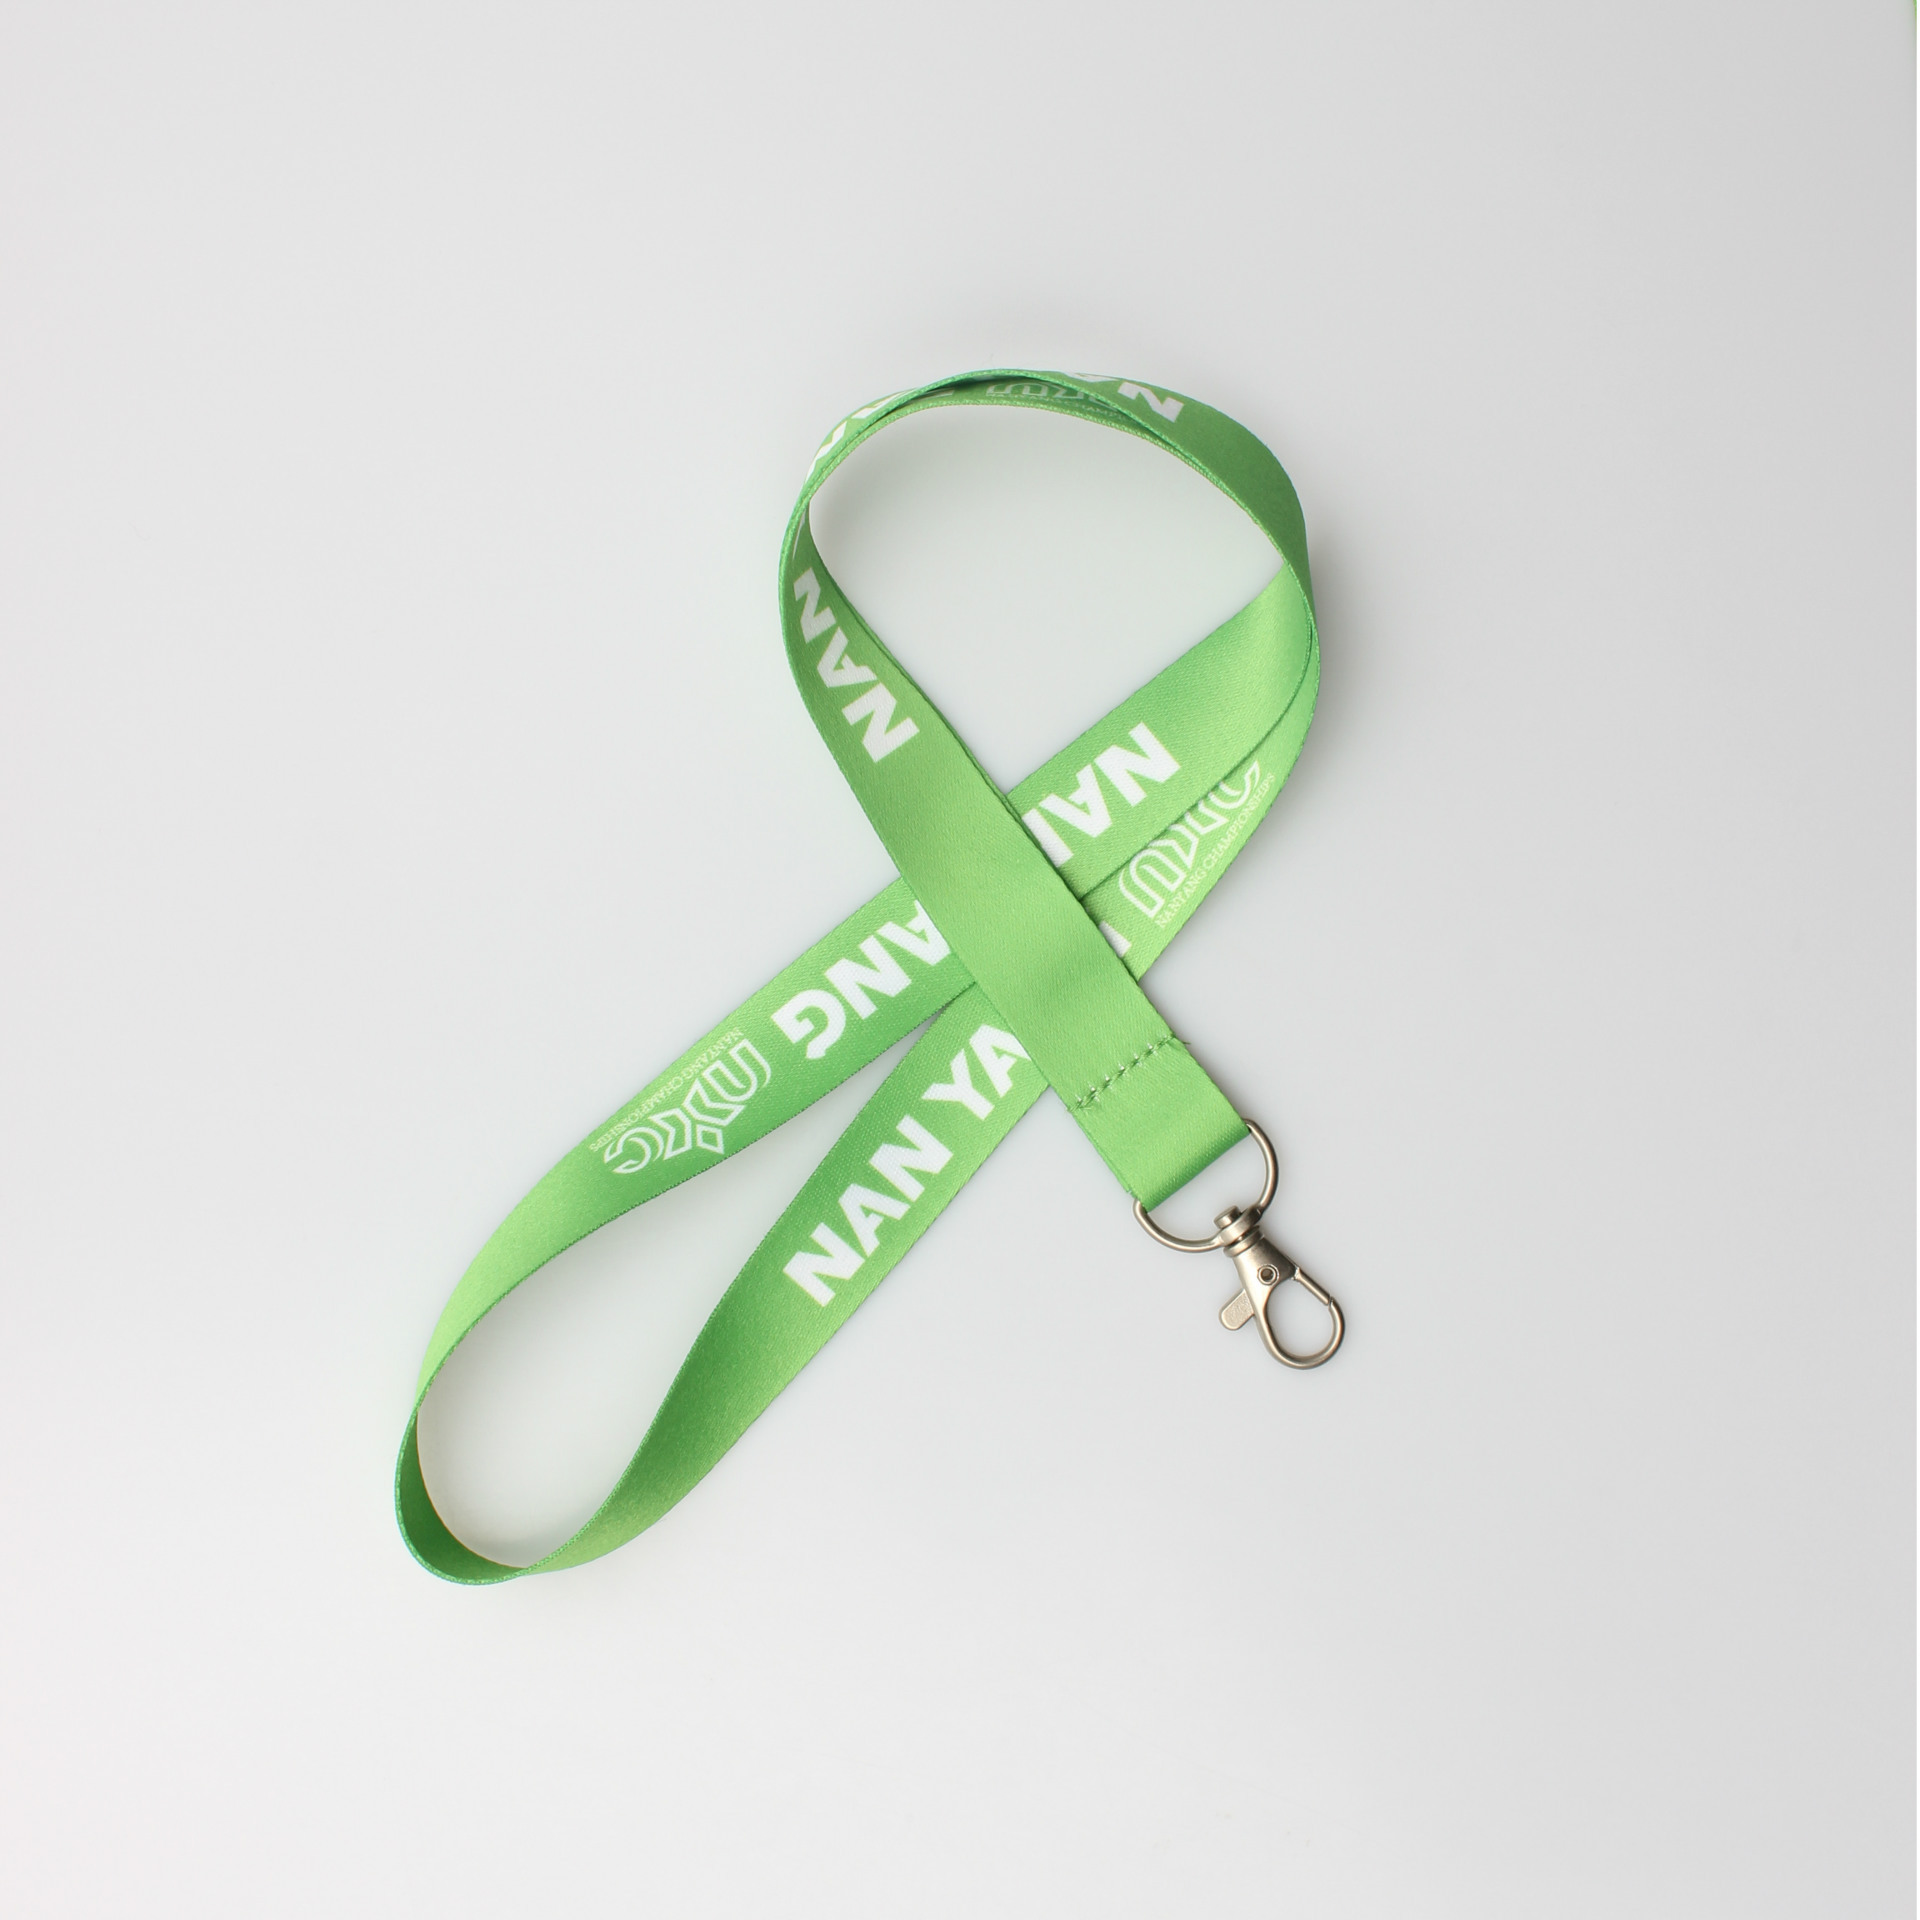 Cutomized printed full color green color lanyard